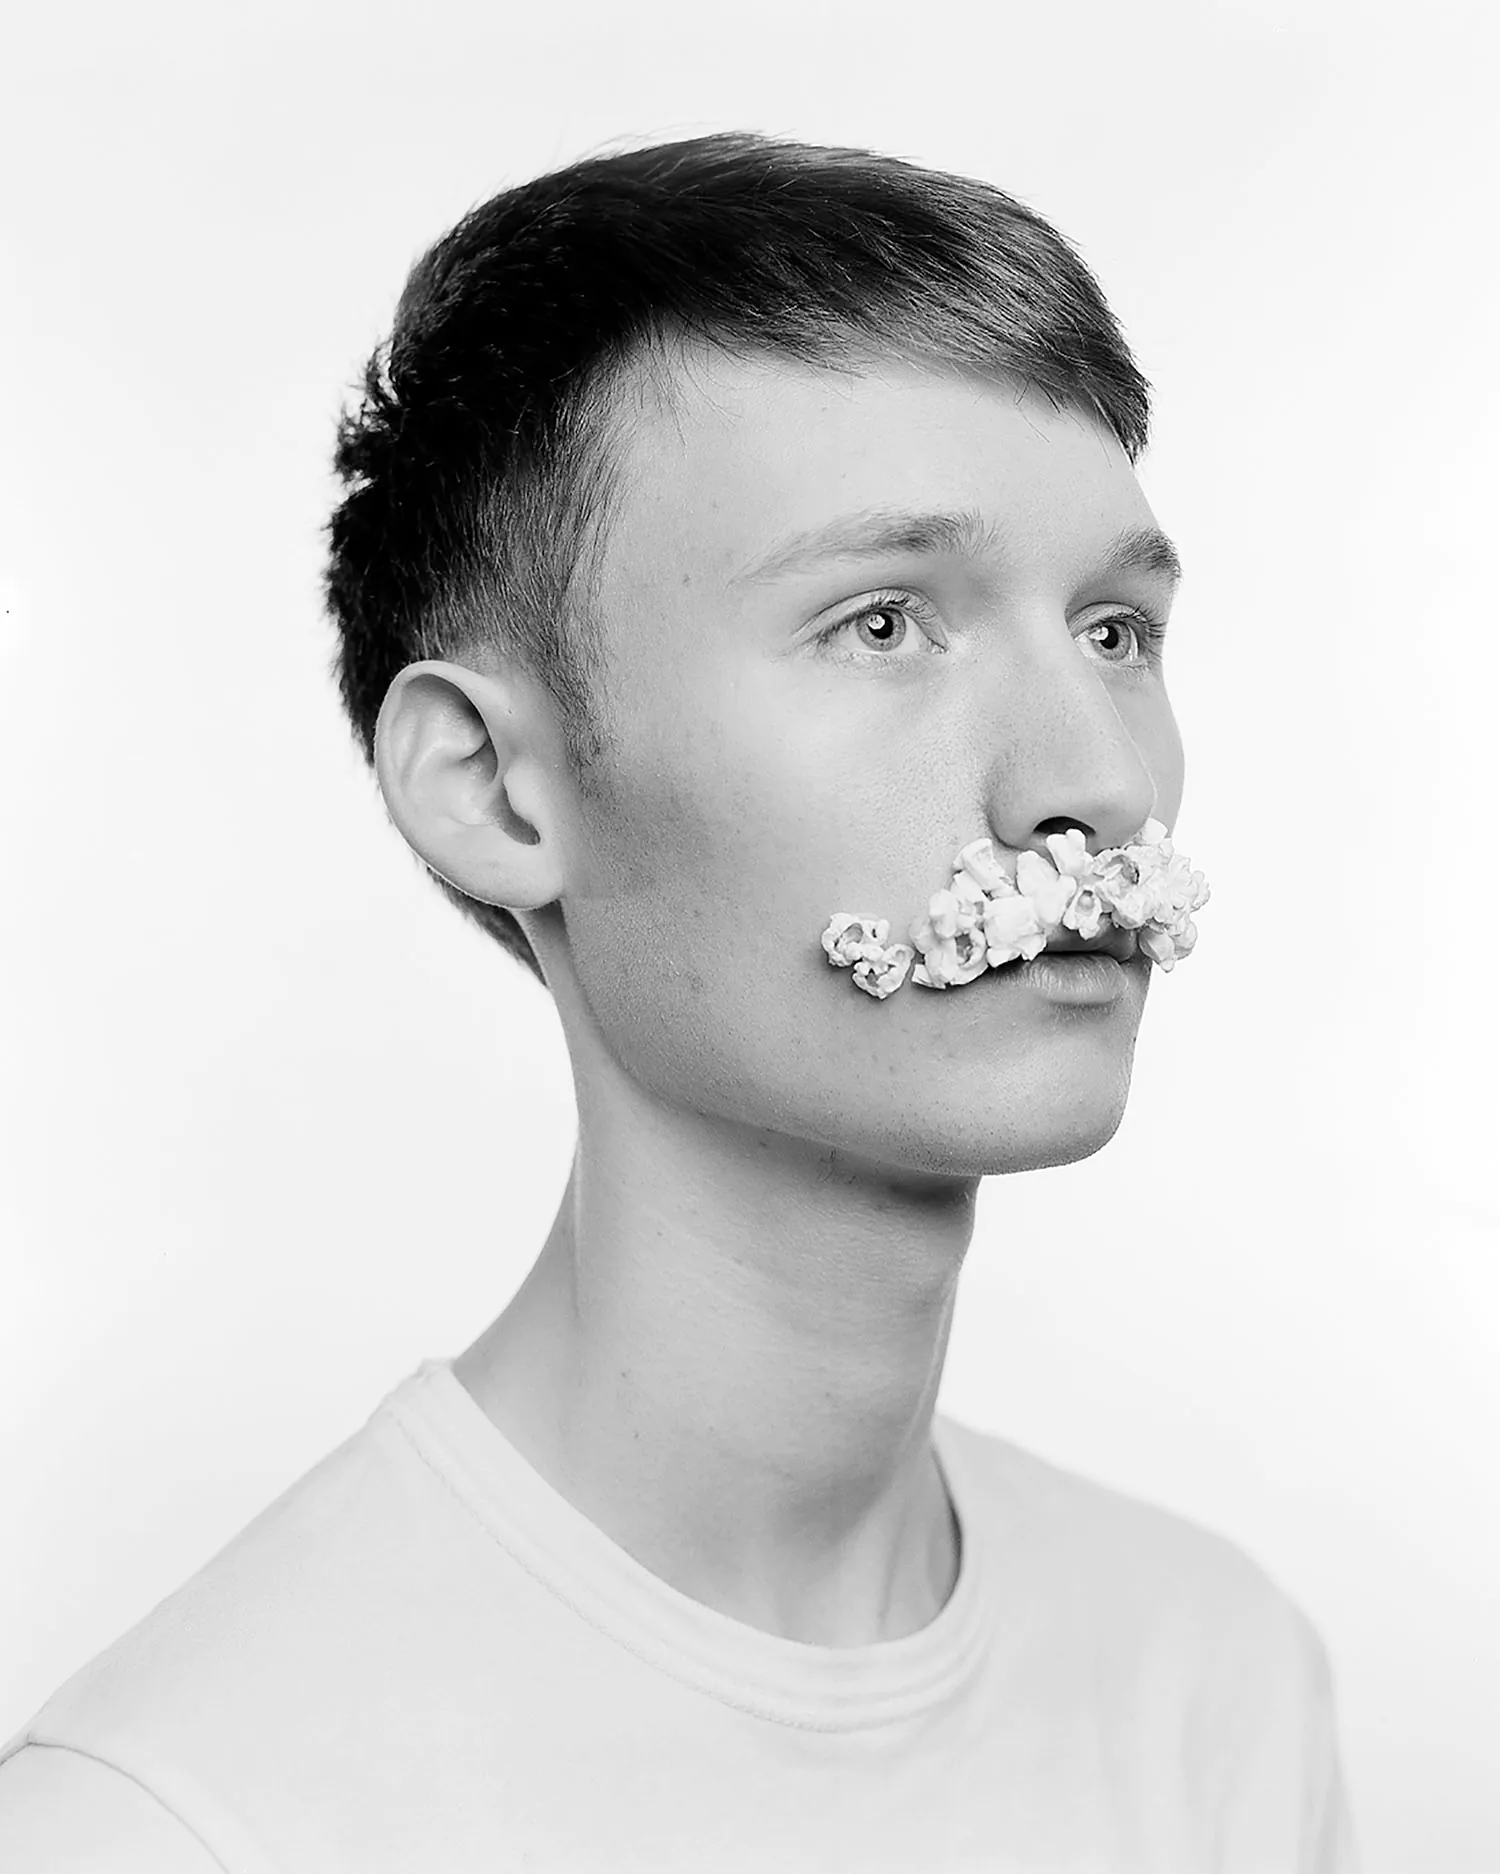 Large format black and white portrait of young man with popcorn as moustache